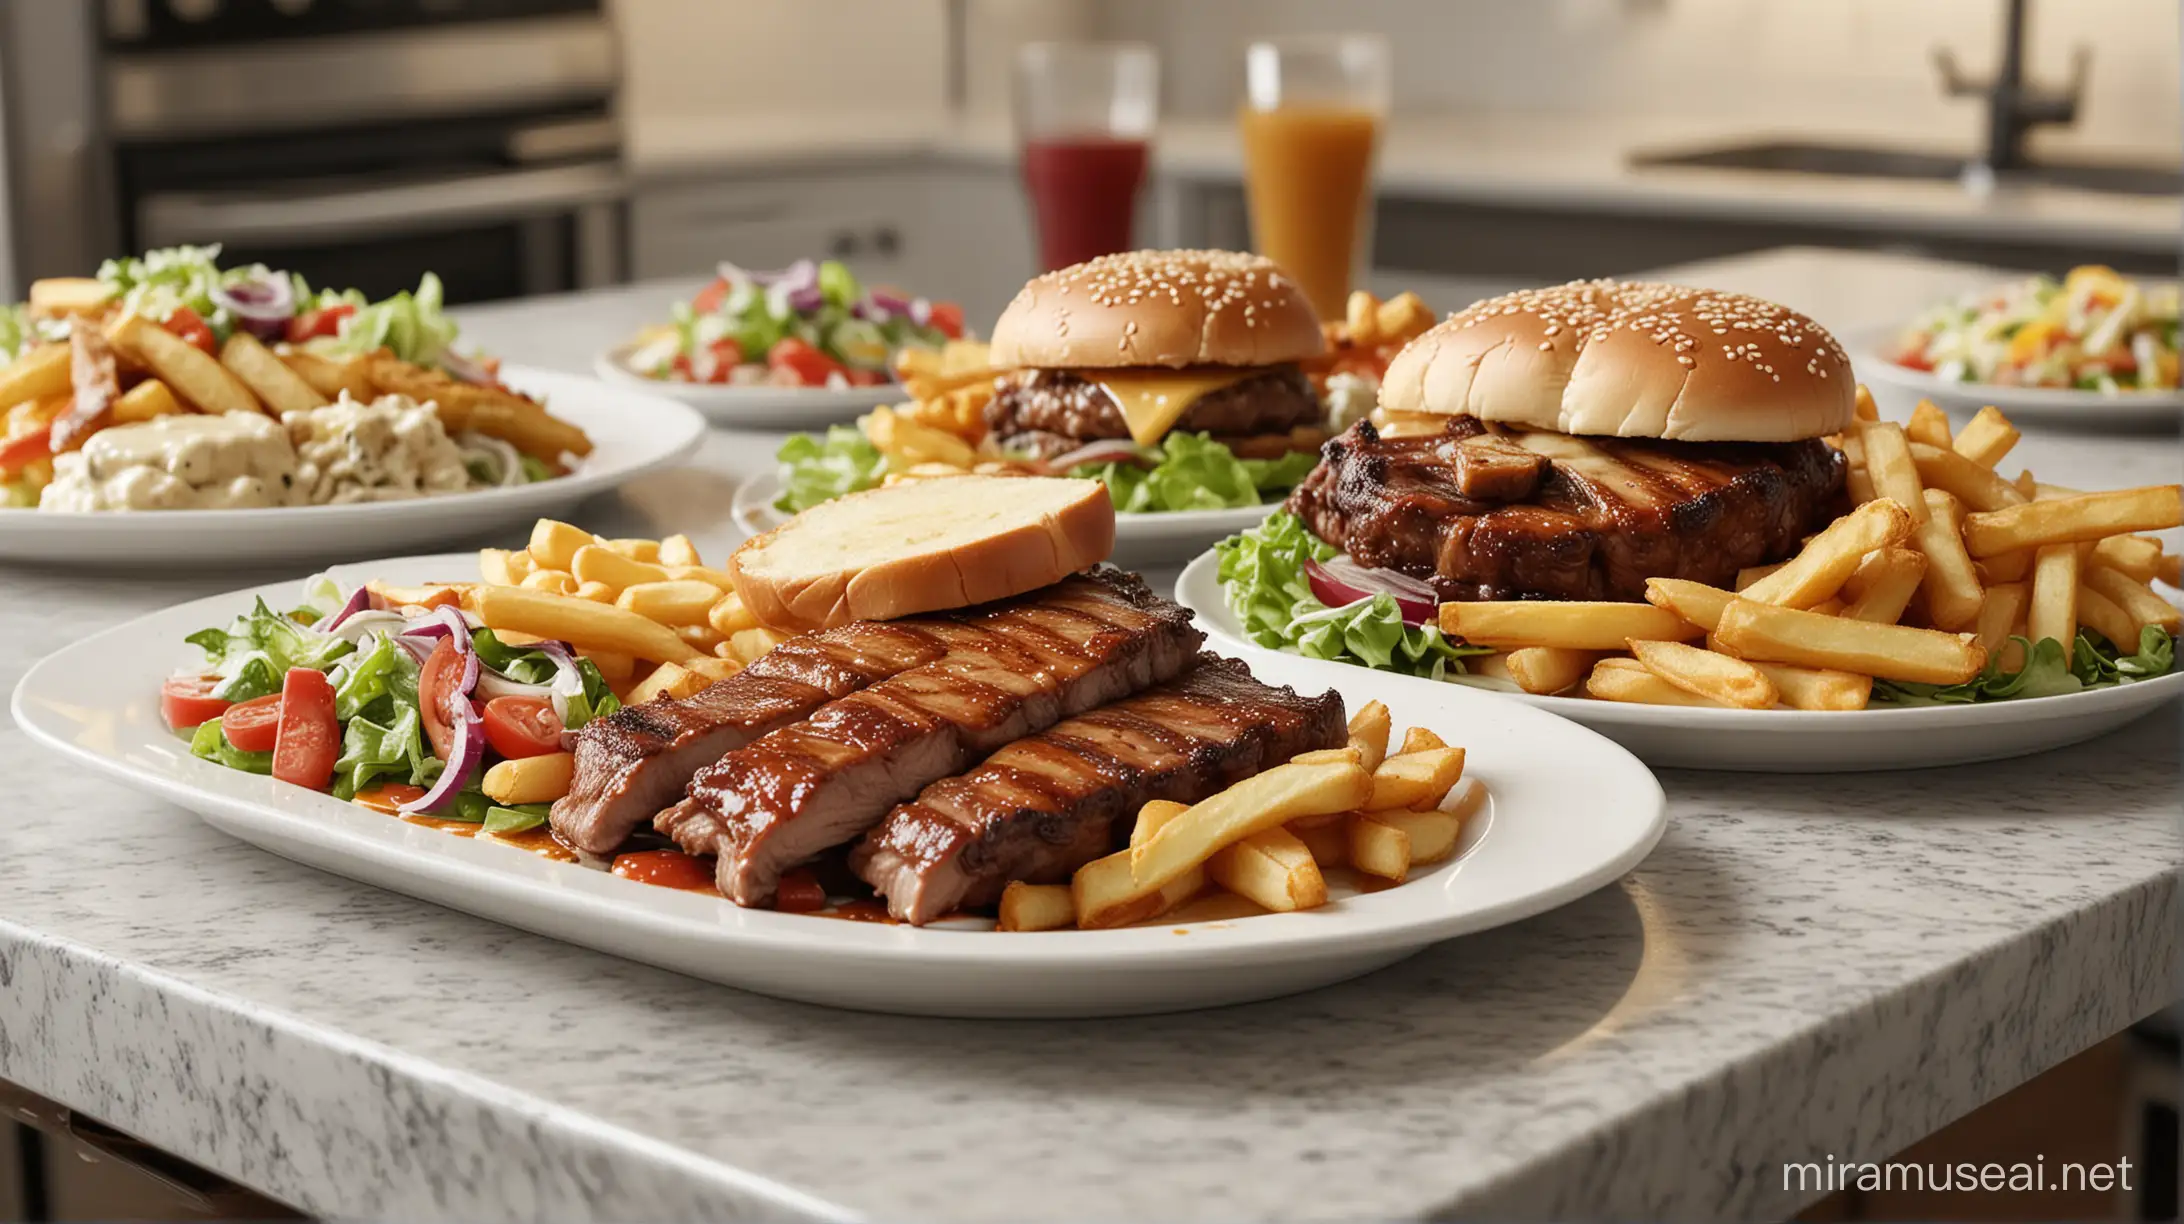 realistic image of a variety of plated meals, one with ribs and fries, one with a hamburger with pepper jack cheese and  one plate with salad.  make sure none of the plates are cut off and there is apace around the image.  Have the plates be on a kitchen counter that is white granite. The background of the kitchen can be blurred so the food is in focus